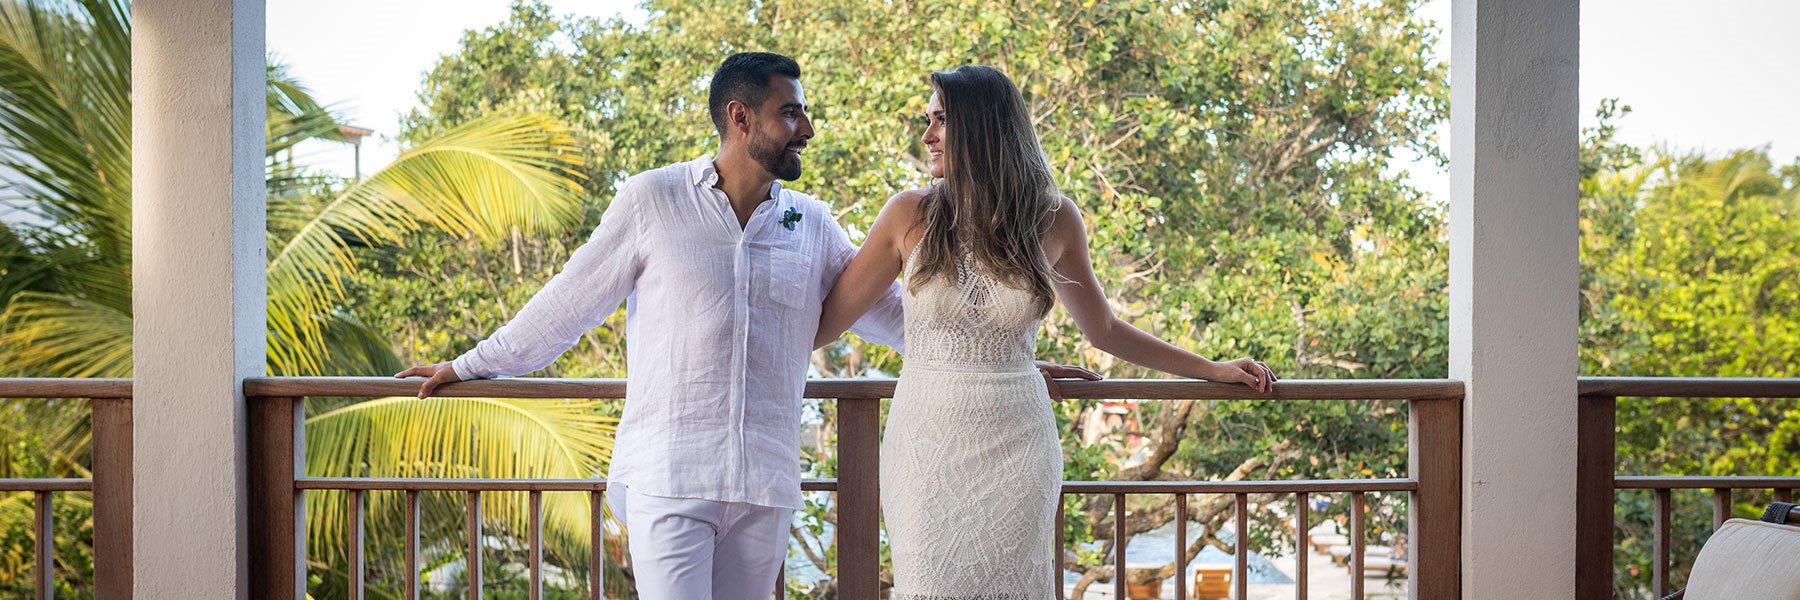 Wedding and Events in Itz’ana Resort and Residences Placencia Stann Creek